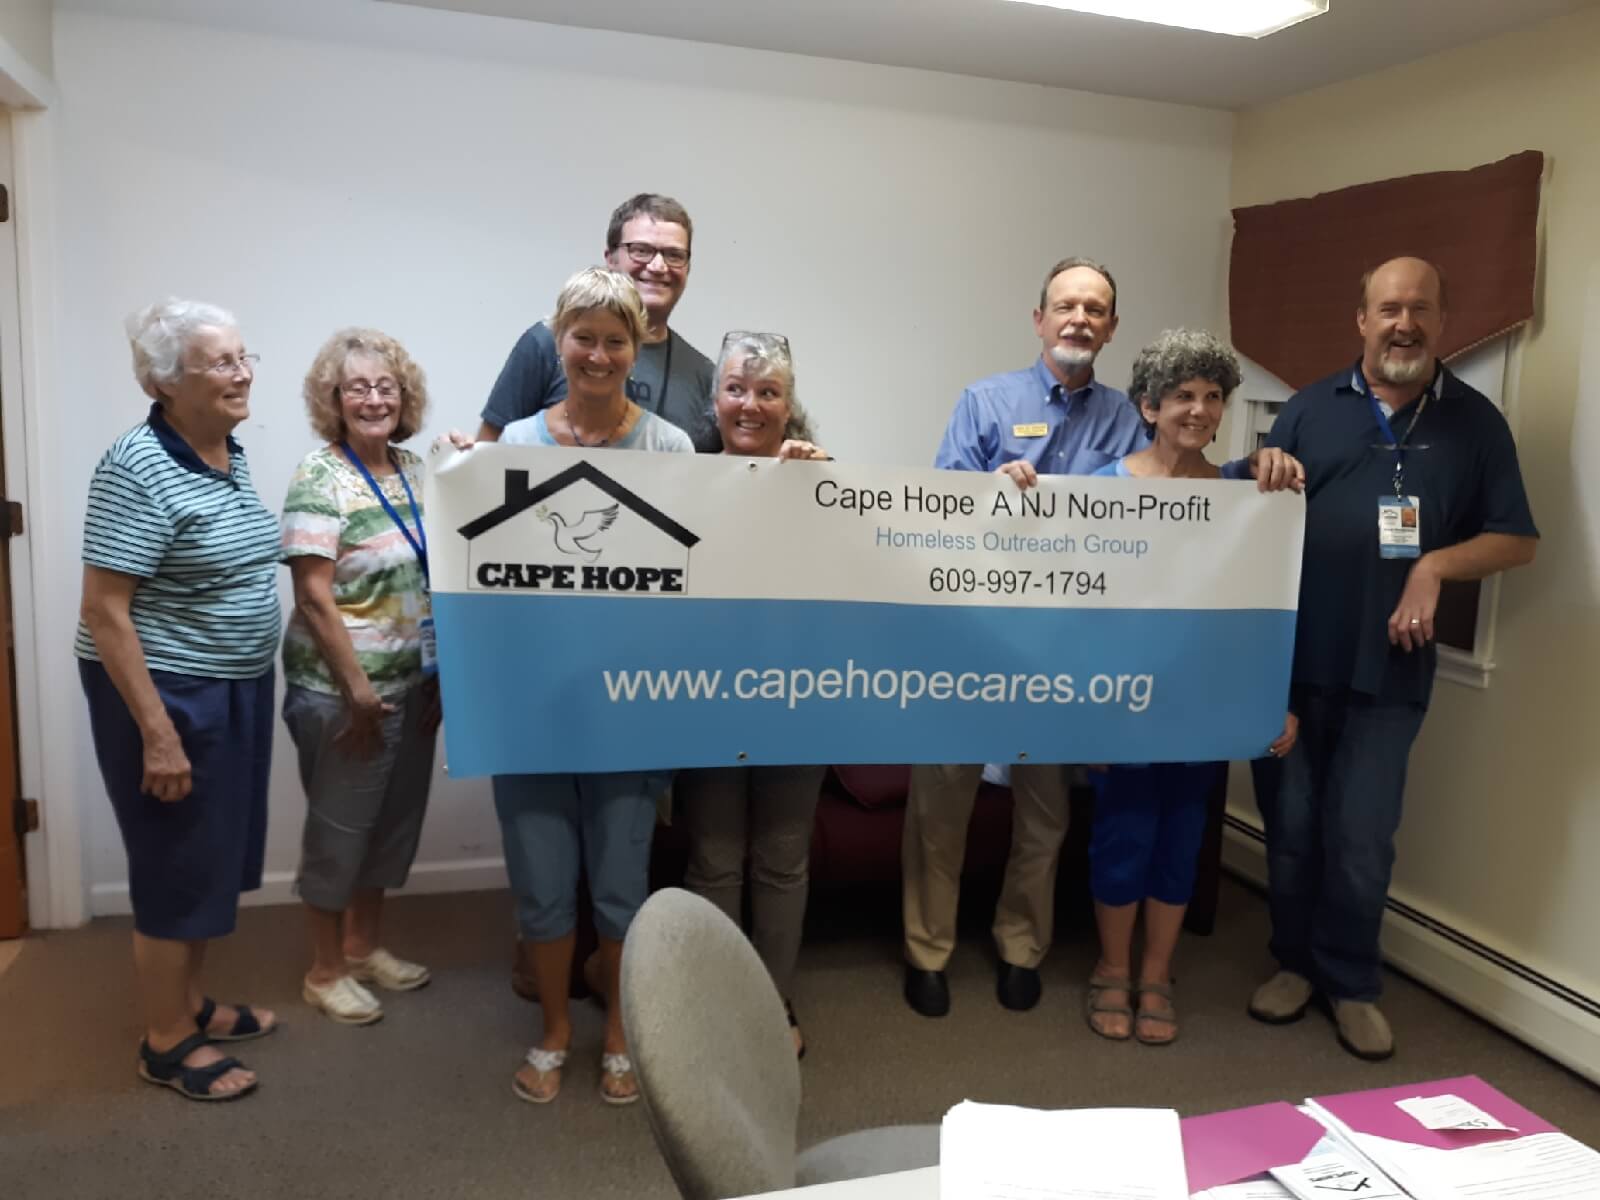 Avalon Manor Improvement Assoc. Donates Funds to Cape Hope Homeless Outreach Group from Proceeds of the Second Annual “Pancake Breakfast for Hope”